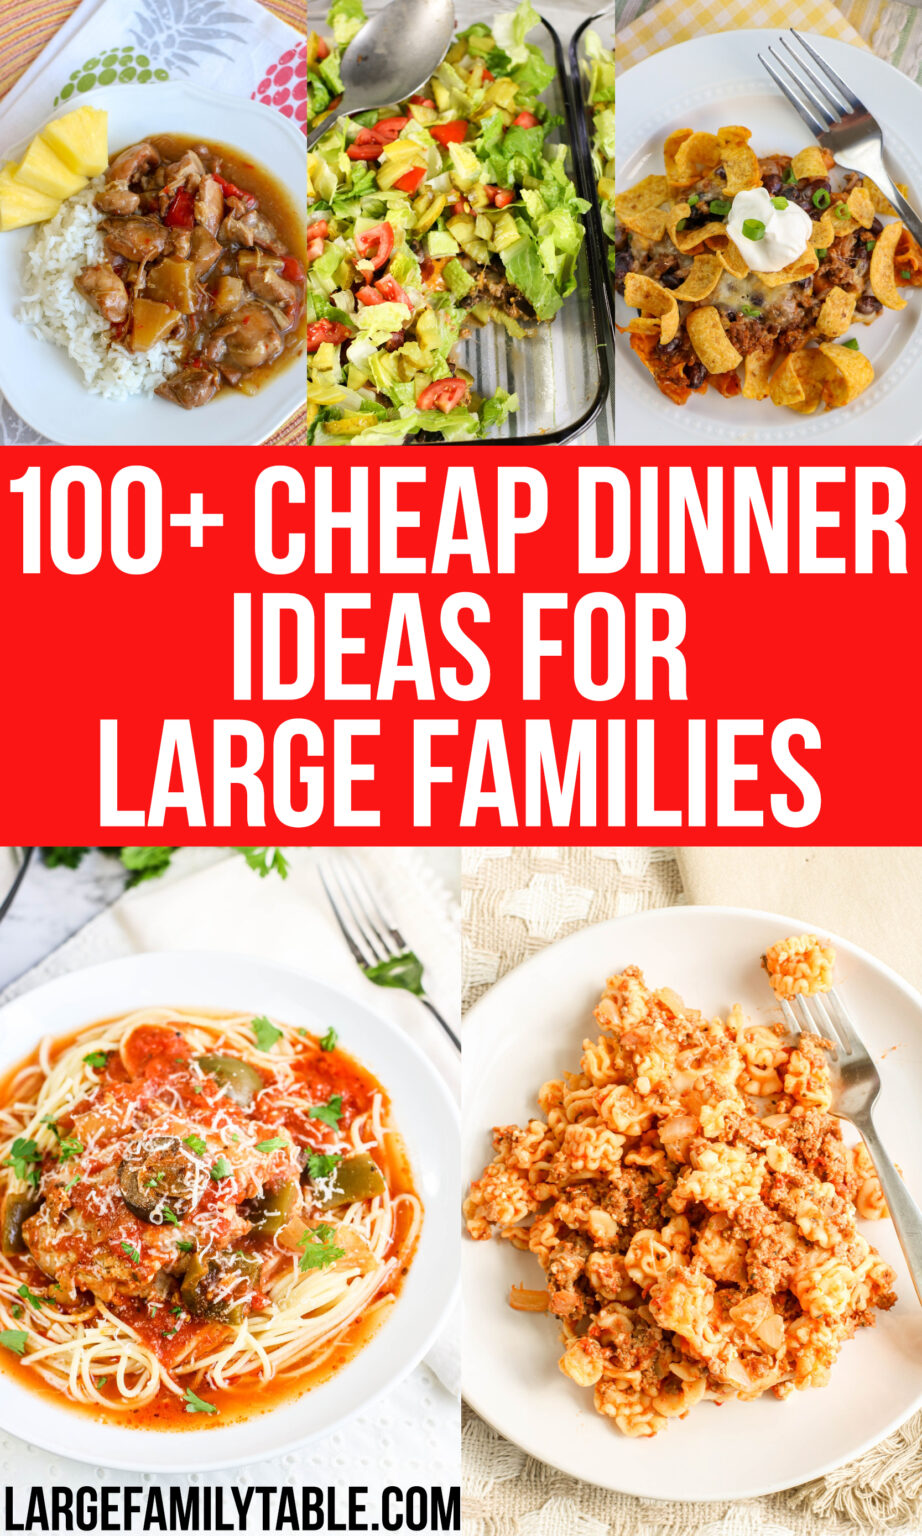 100+ Cheap Dinner Ideas For Large Families - Large Family Table